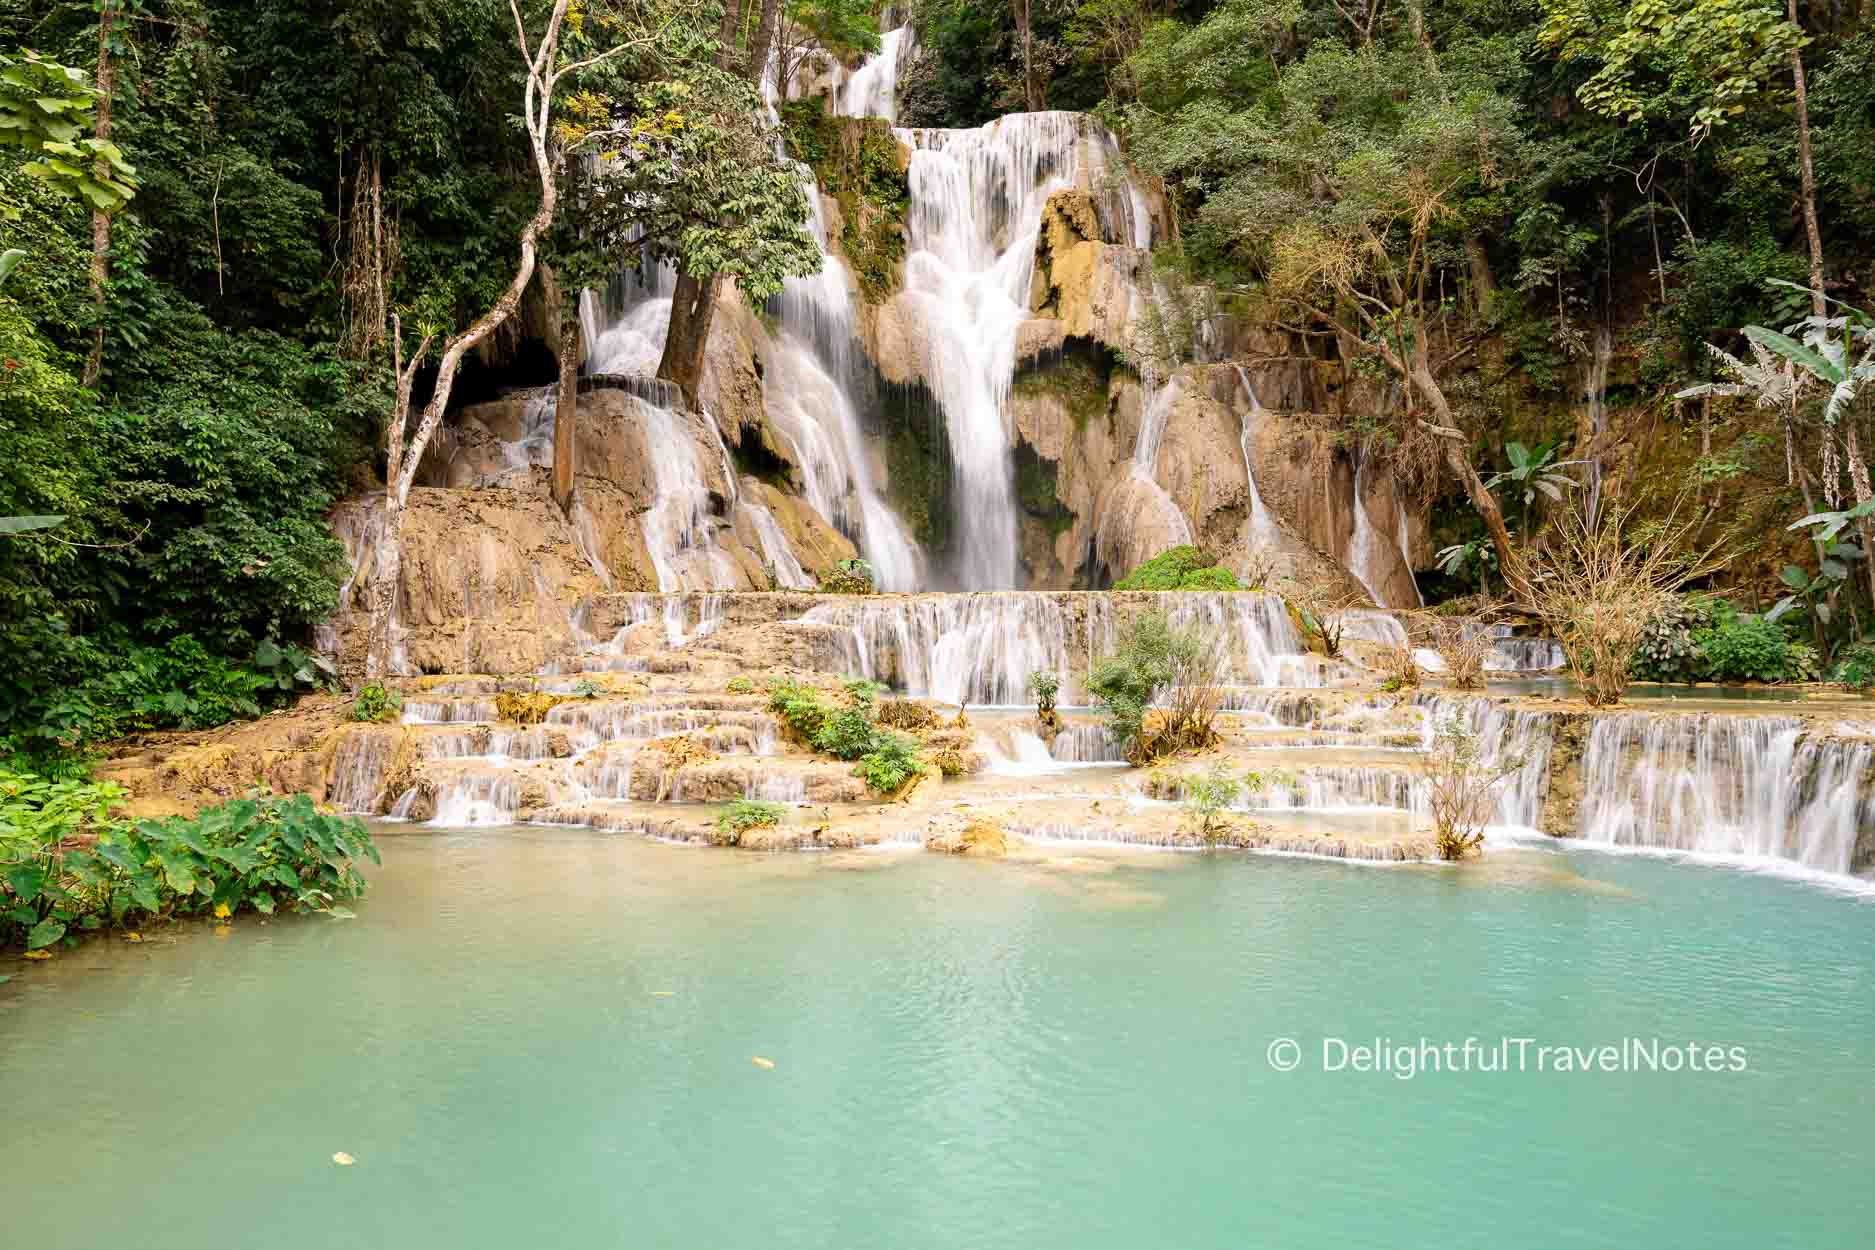 the main Kuang Si waterfall with its cascading water and milky blue pool.